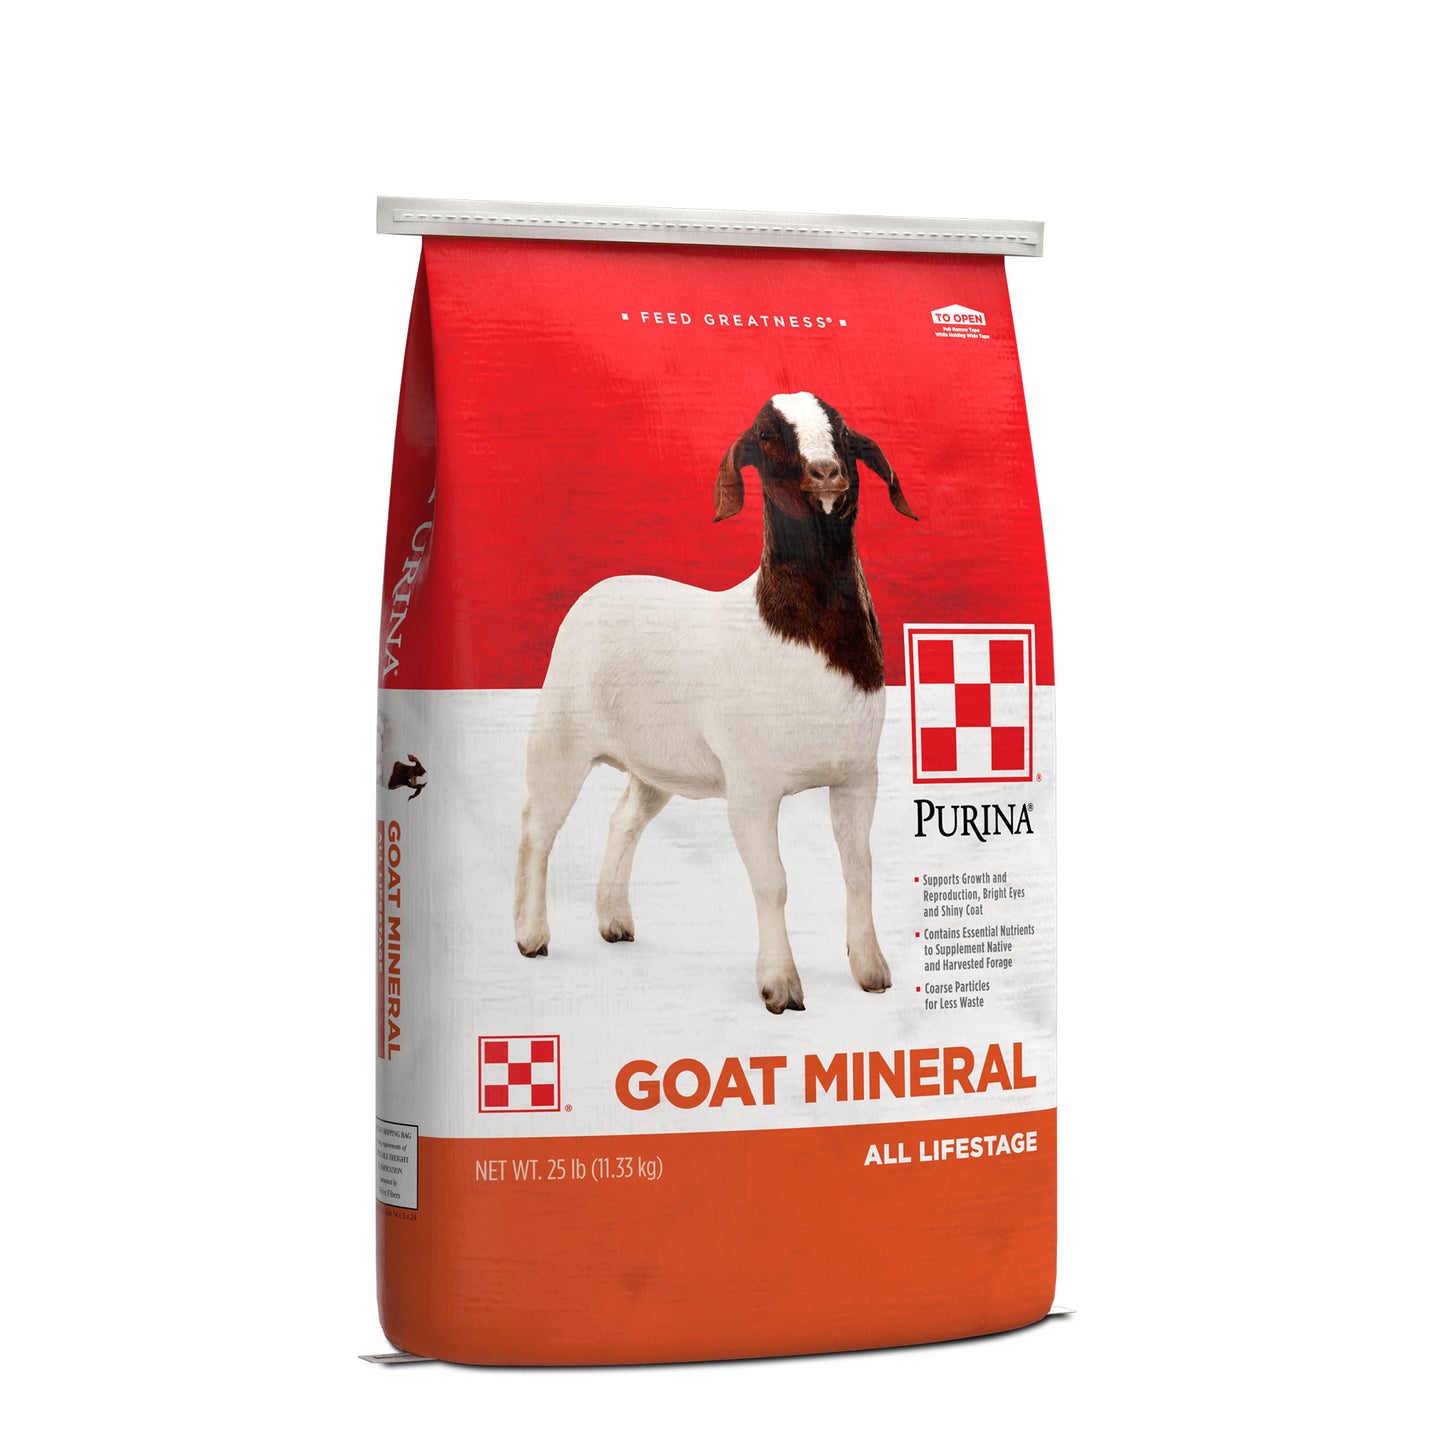 Purina Goat Mineral 25 Pound bag